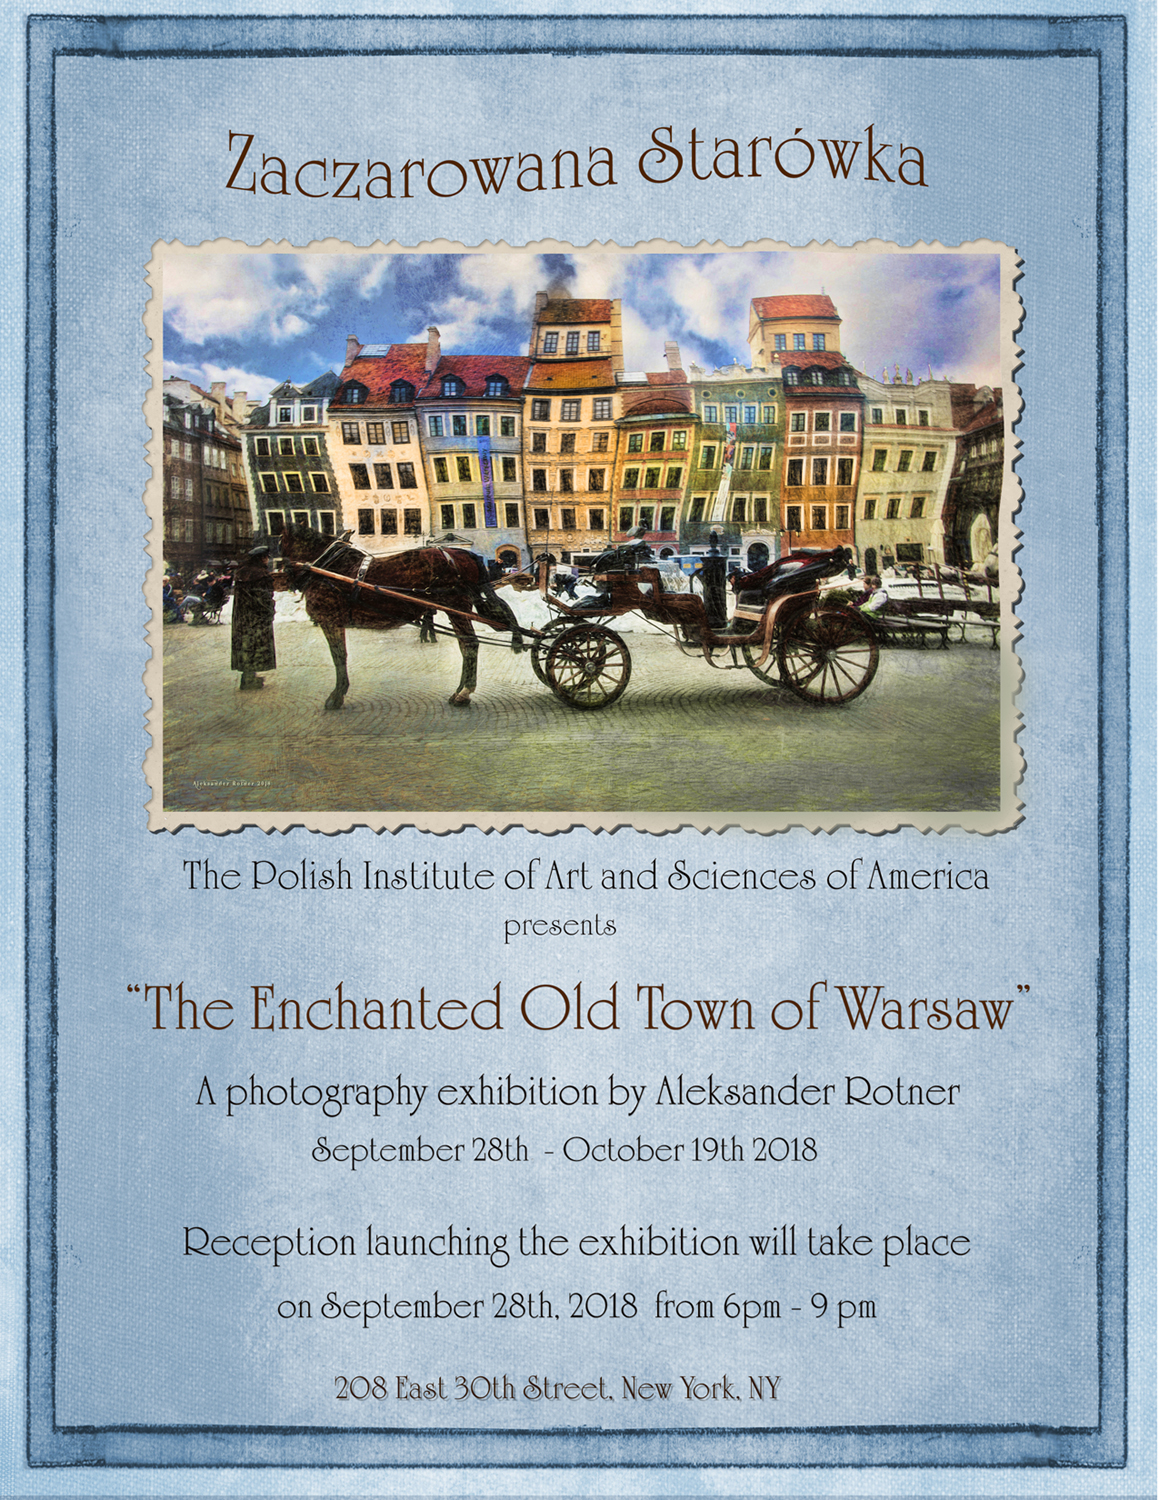 "The Enchanted Old Town of Warsaw"